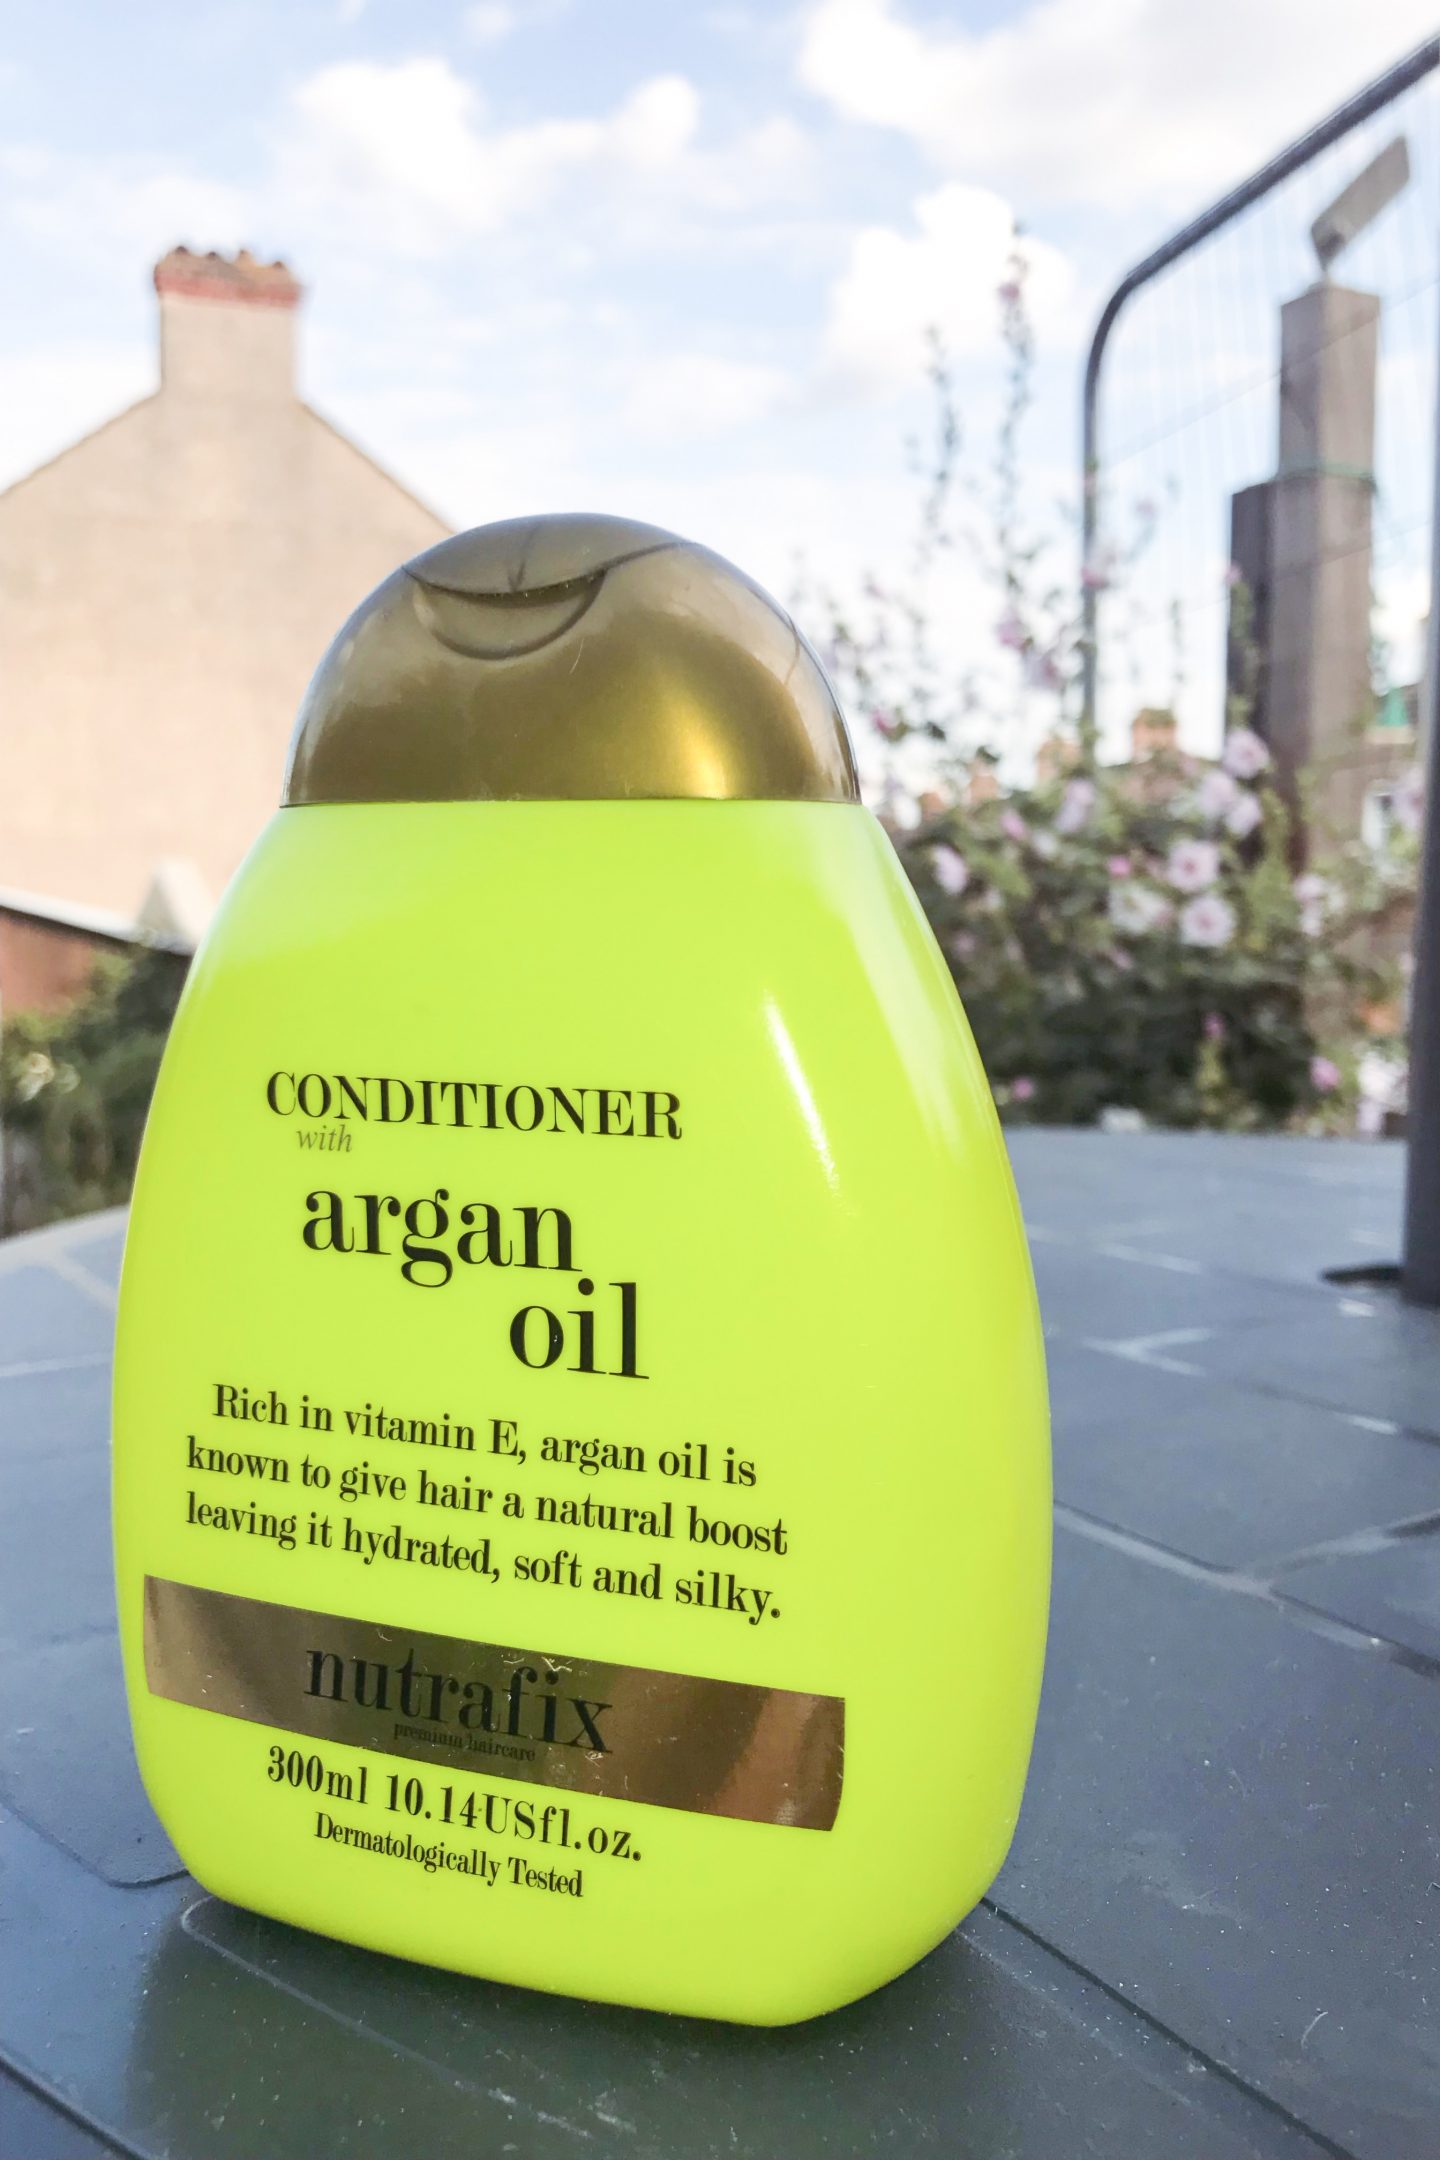 Nutrafix argan oil conditioner 1440x2160 - Co-Washing - 4 steps to Ultra Moisturised Relaxed Hair [Video]